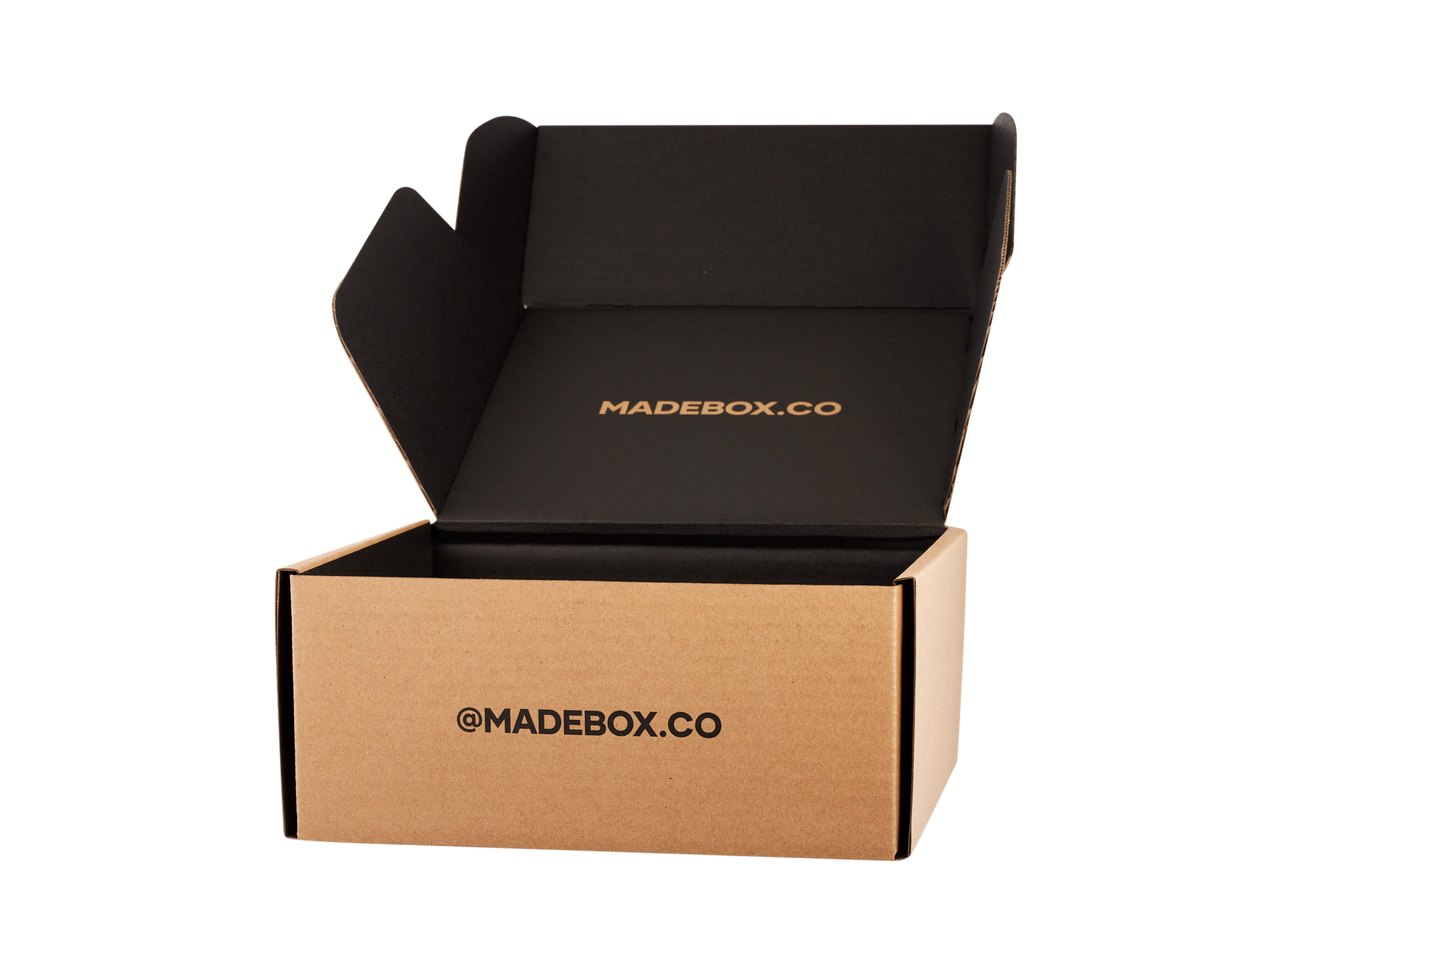 The Finders Keepers X Madebox Flavour Finds Box